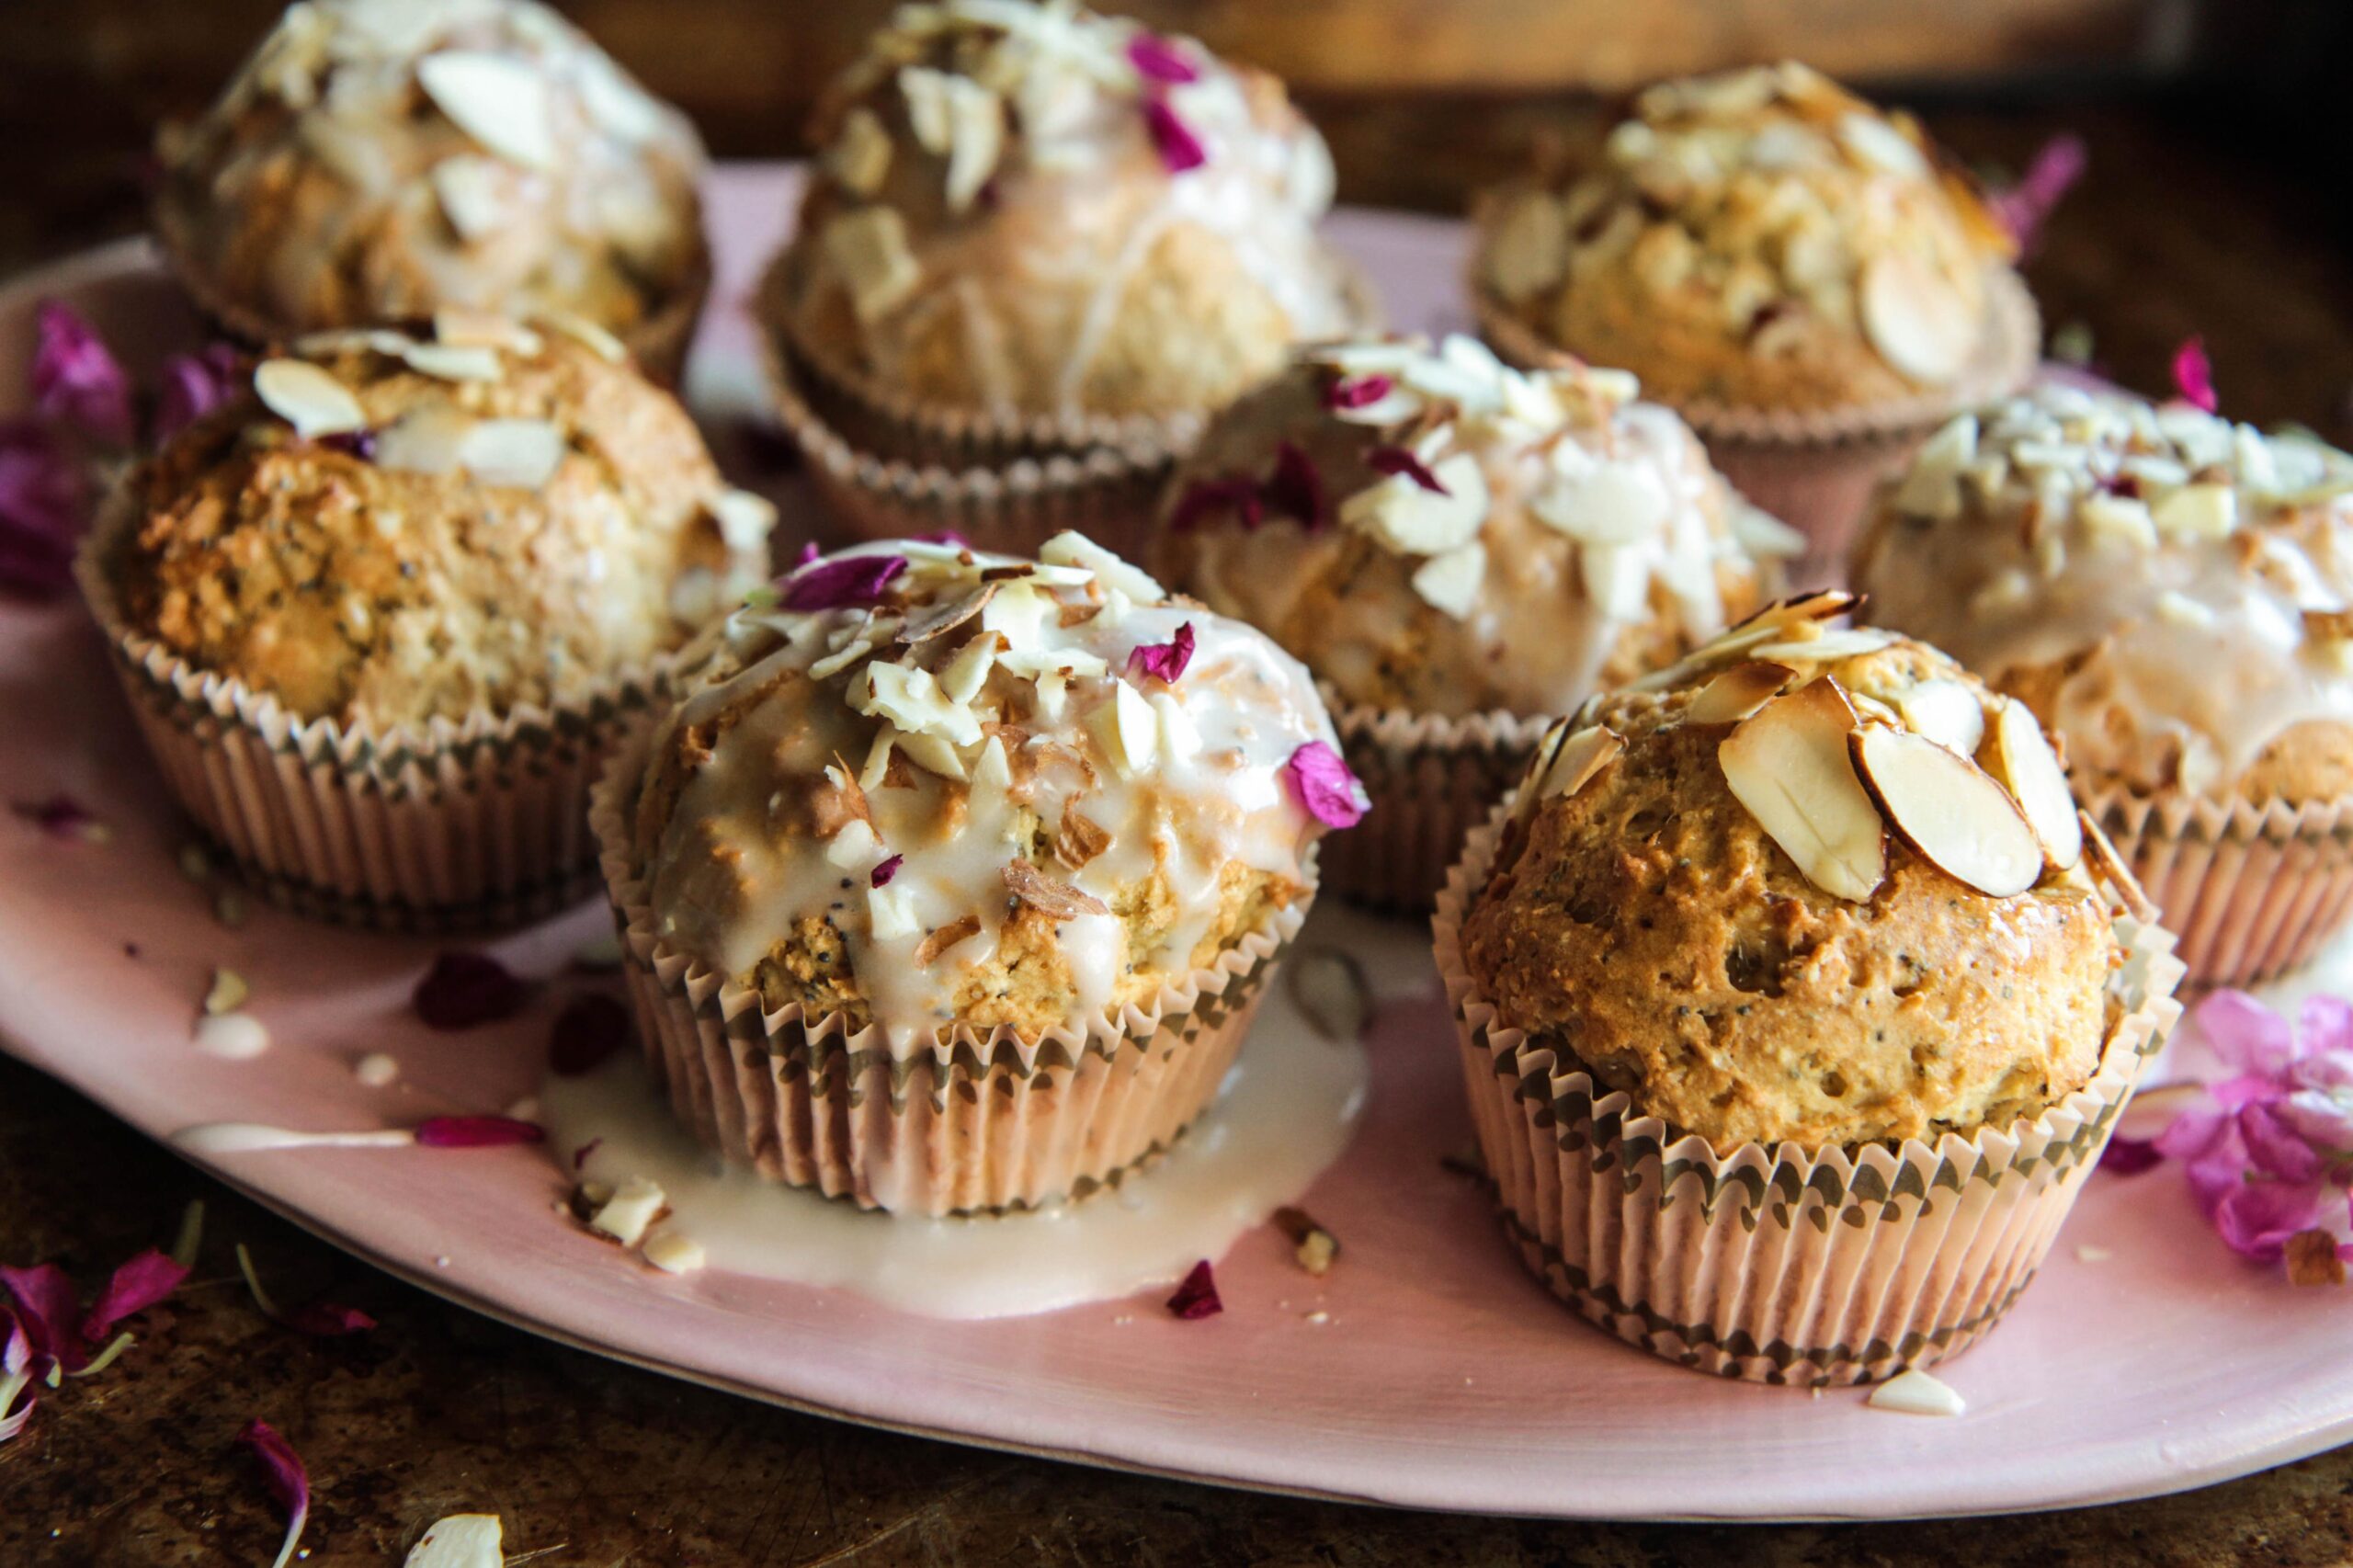  The muffins have a perfect crispy golden crust to make any foodie's mouth water.